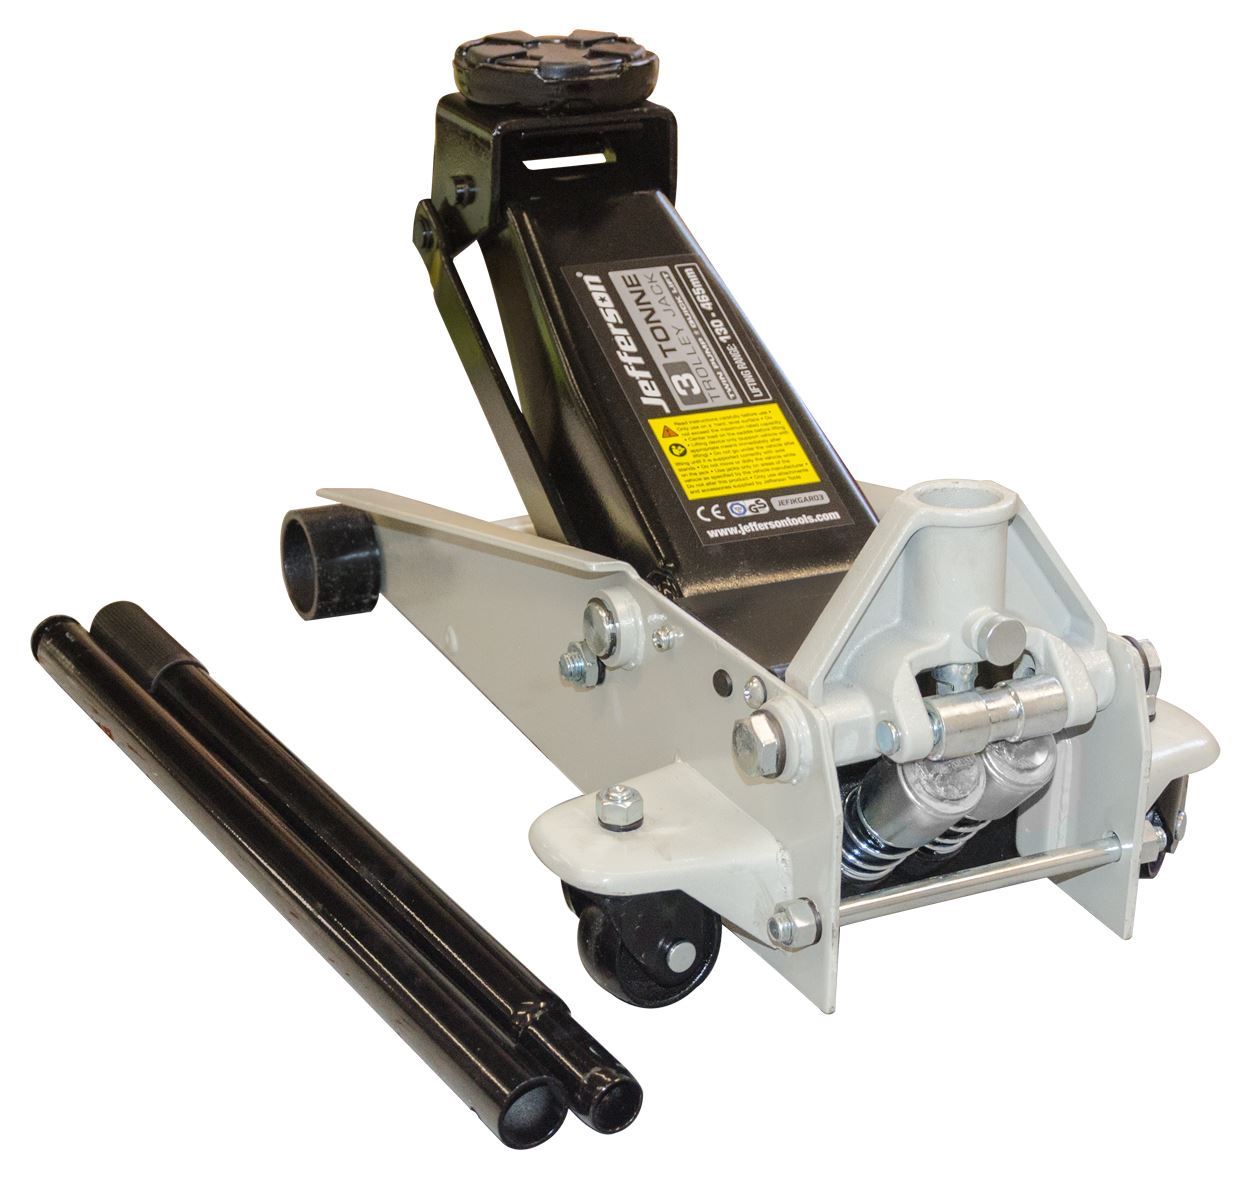 3 Tonne Garage Jack with Compatible Rubber Pad & Spares